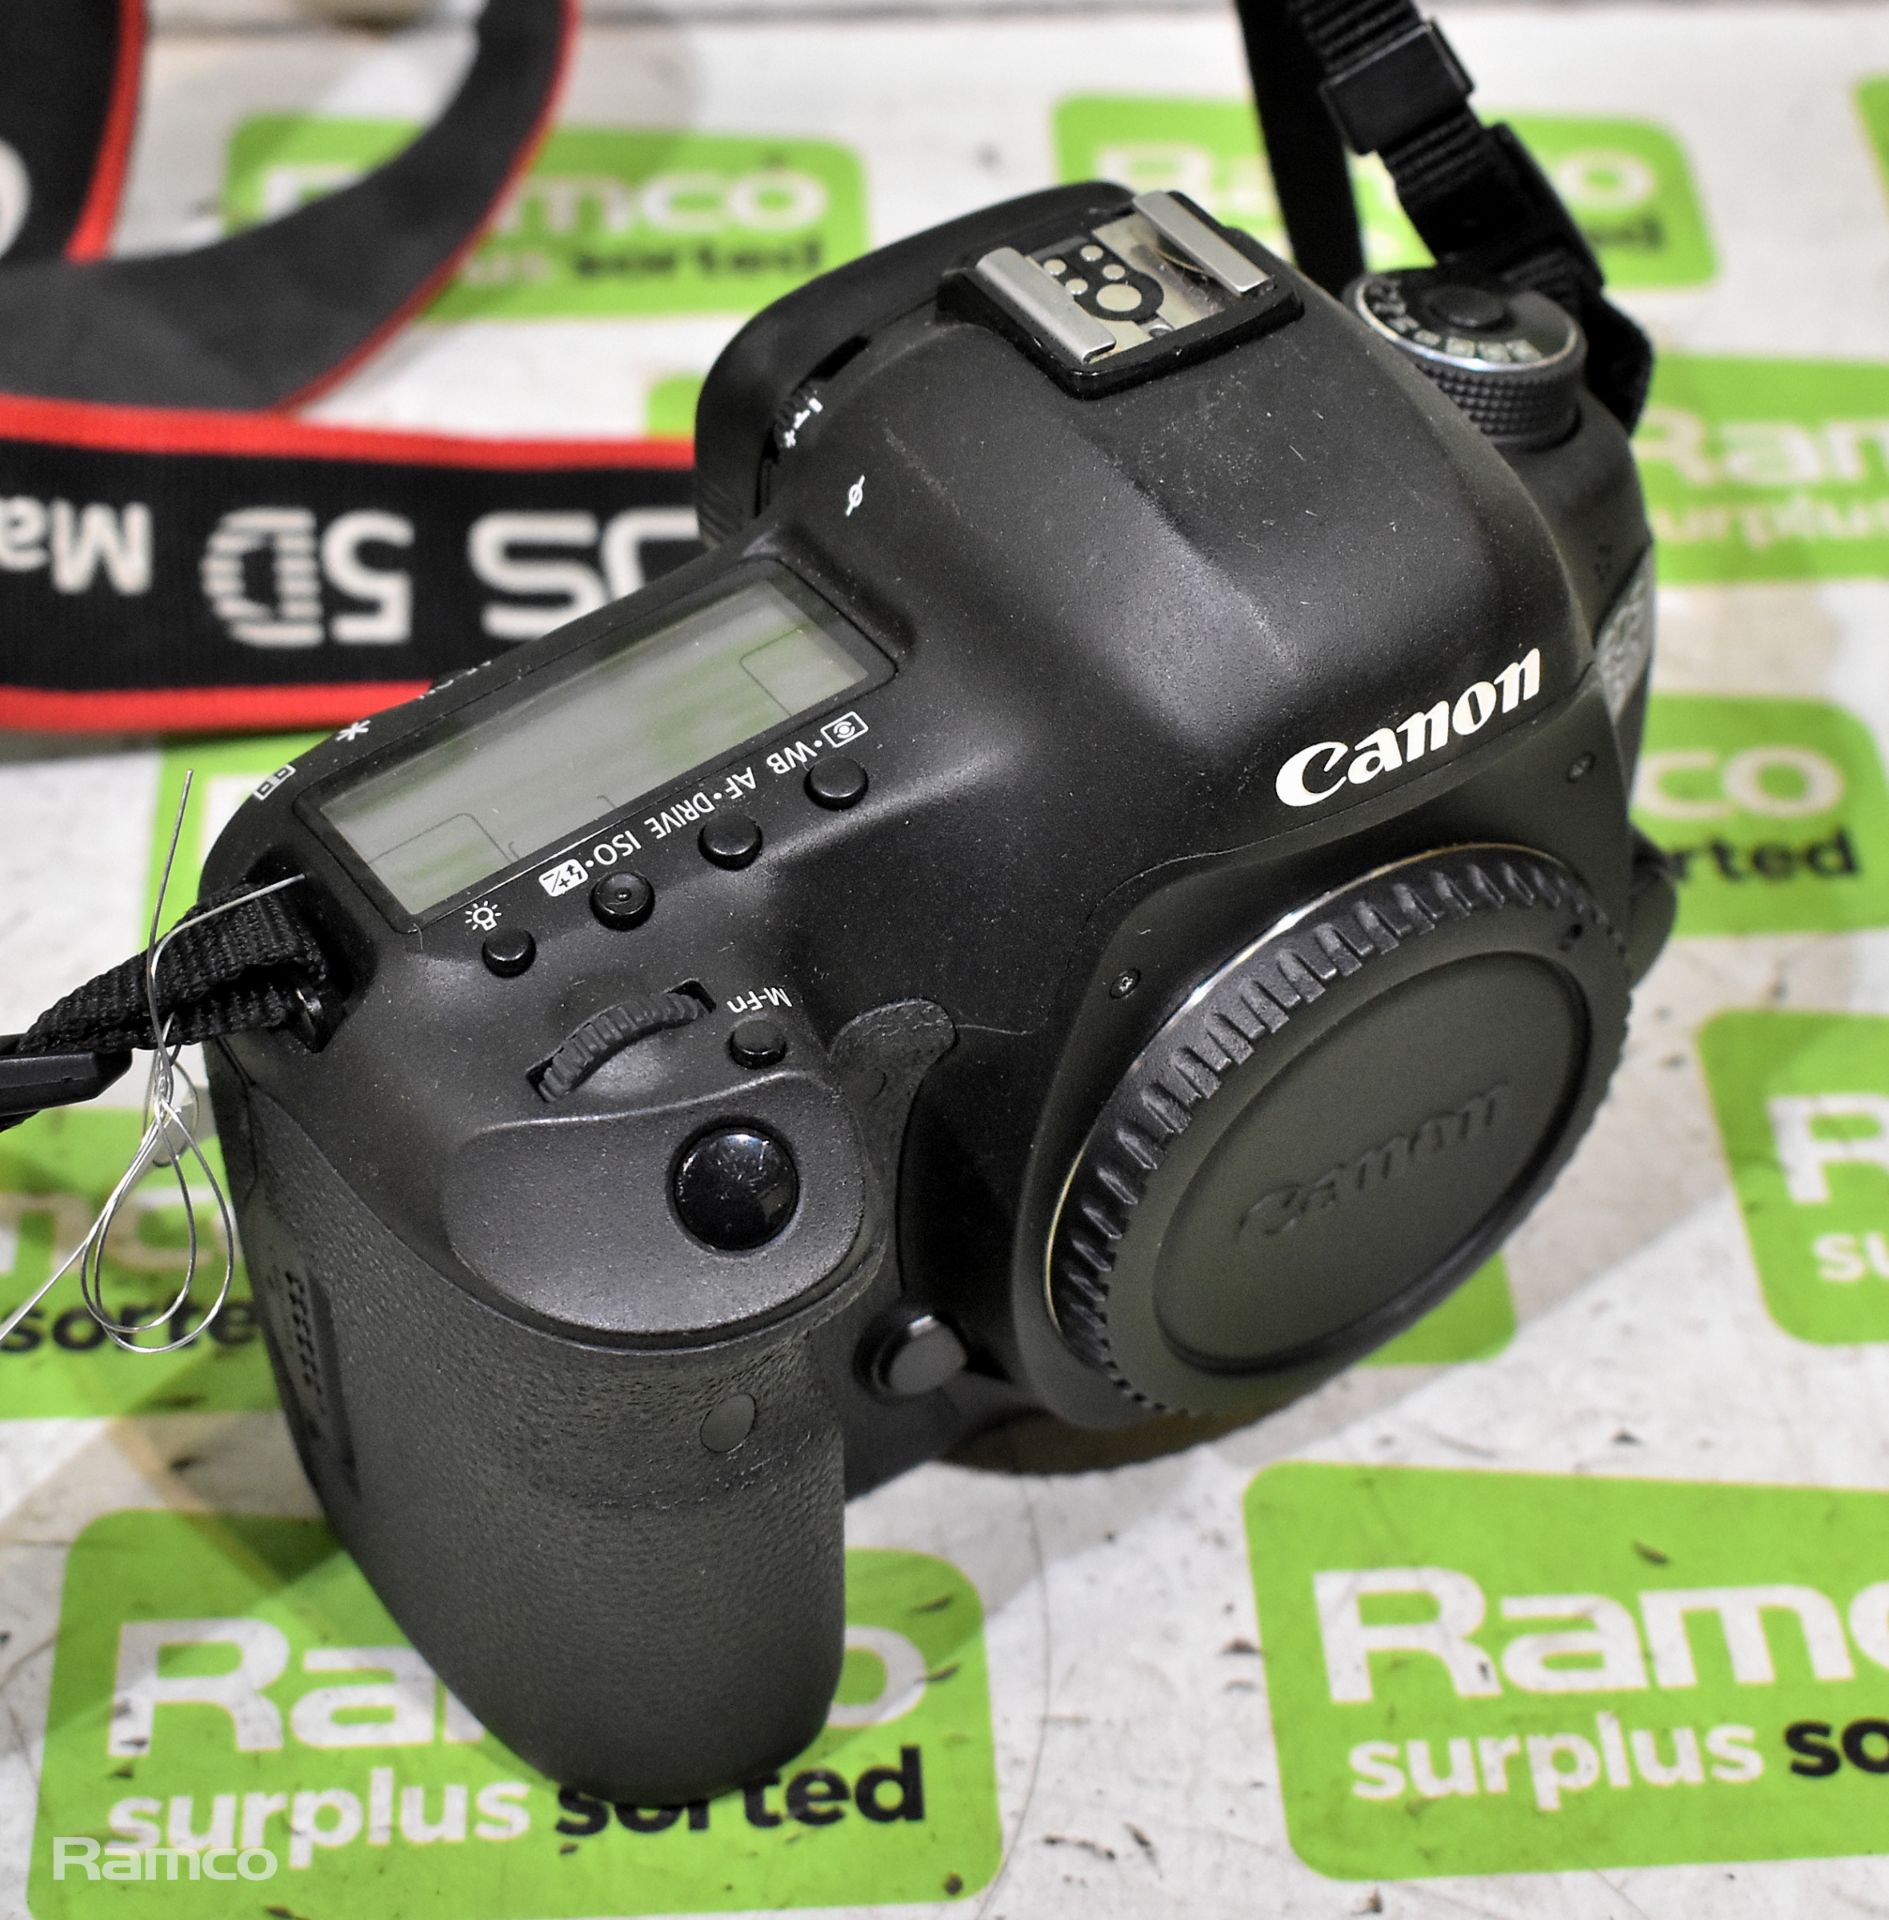 Canon EOS 5D Mark lll DSLR camera (no battery) - Image 4 of 9